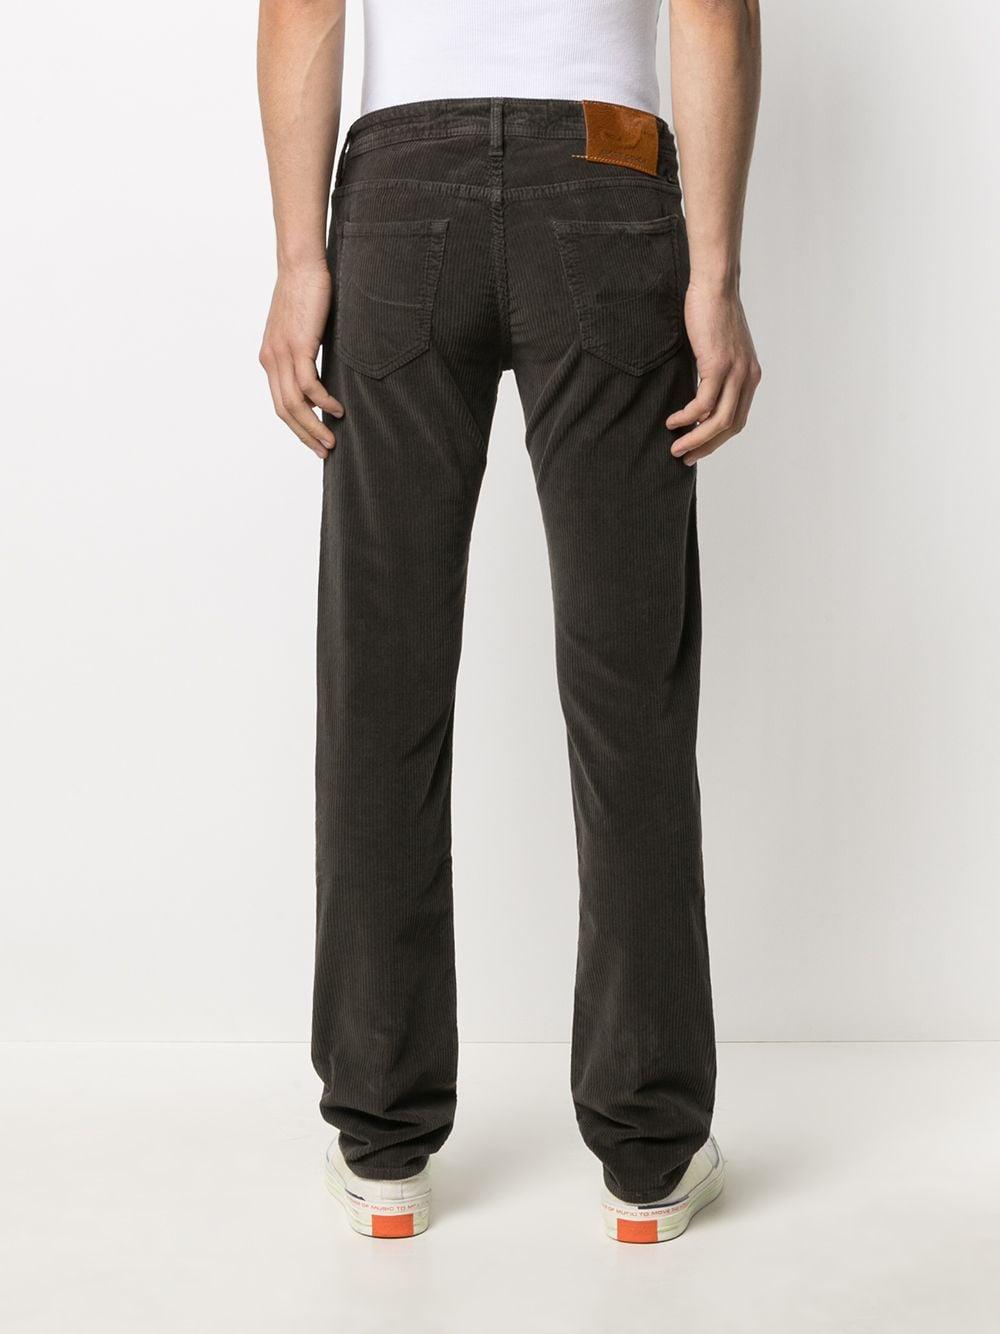 Jacob Cohen Corduroy Straight-leg Trousers in Brown for Men - Lyst